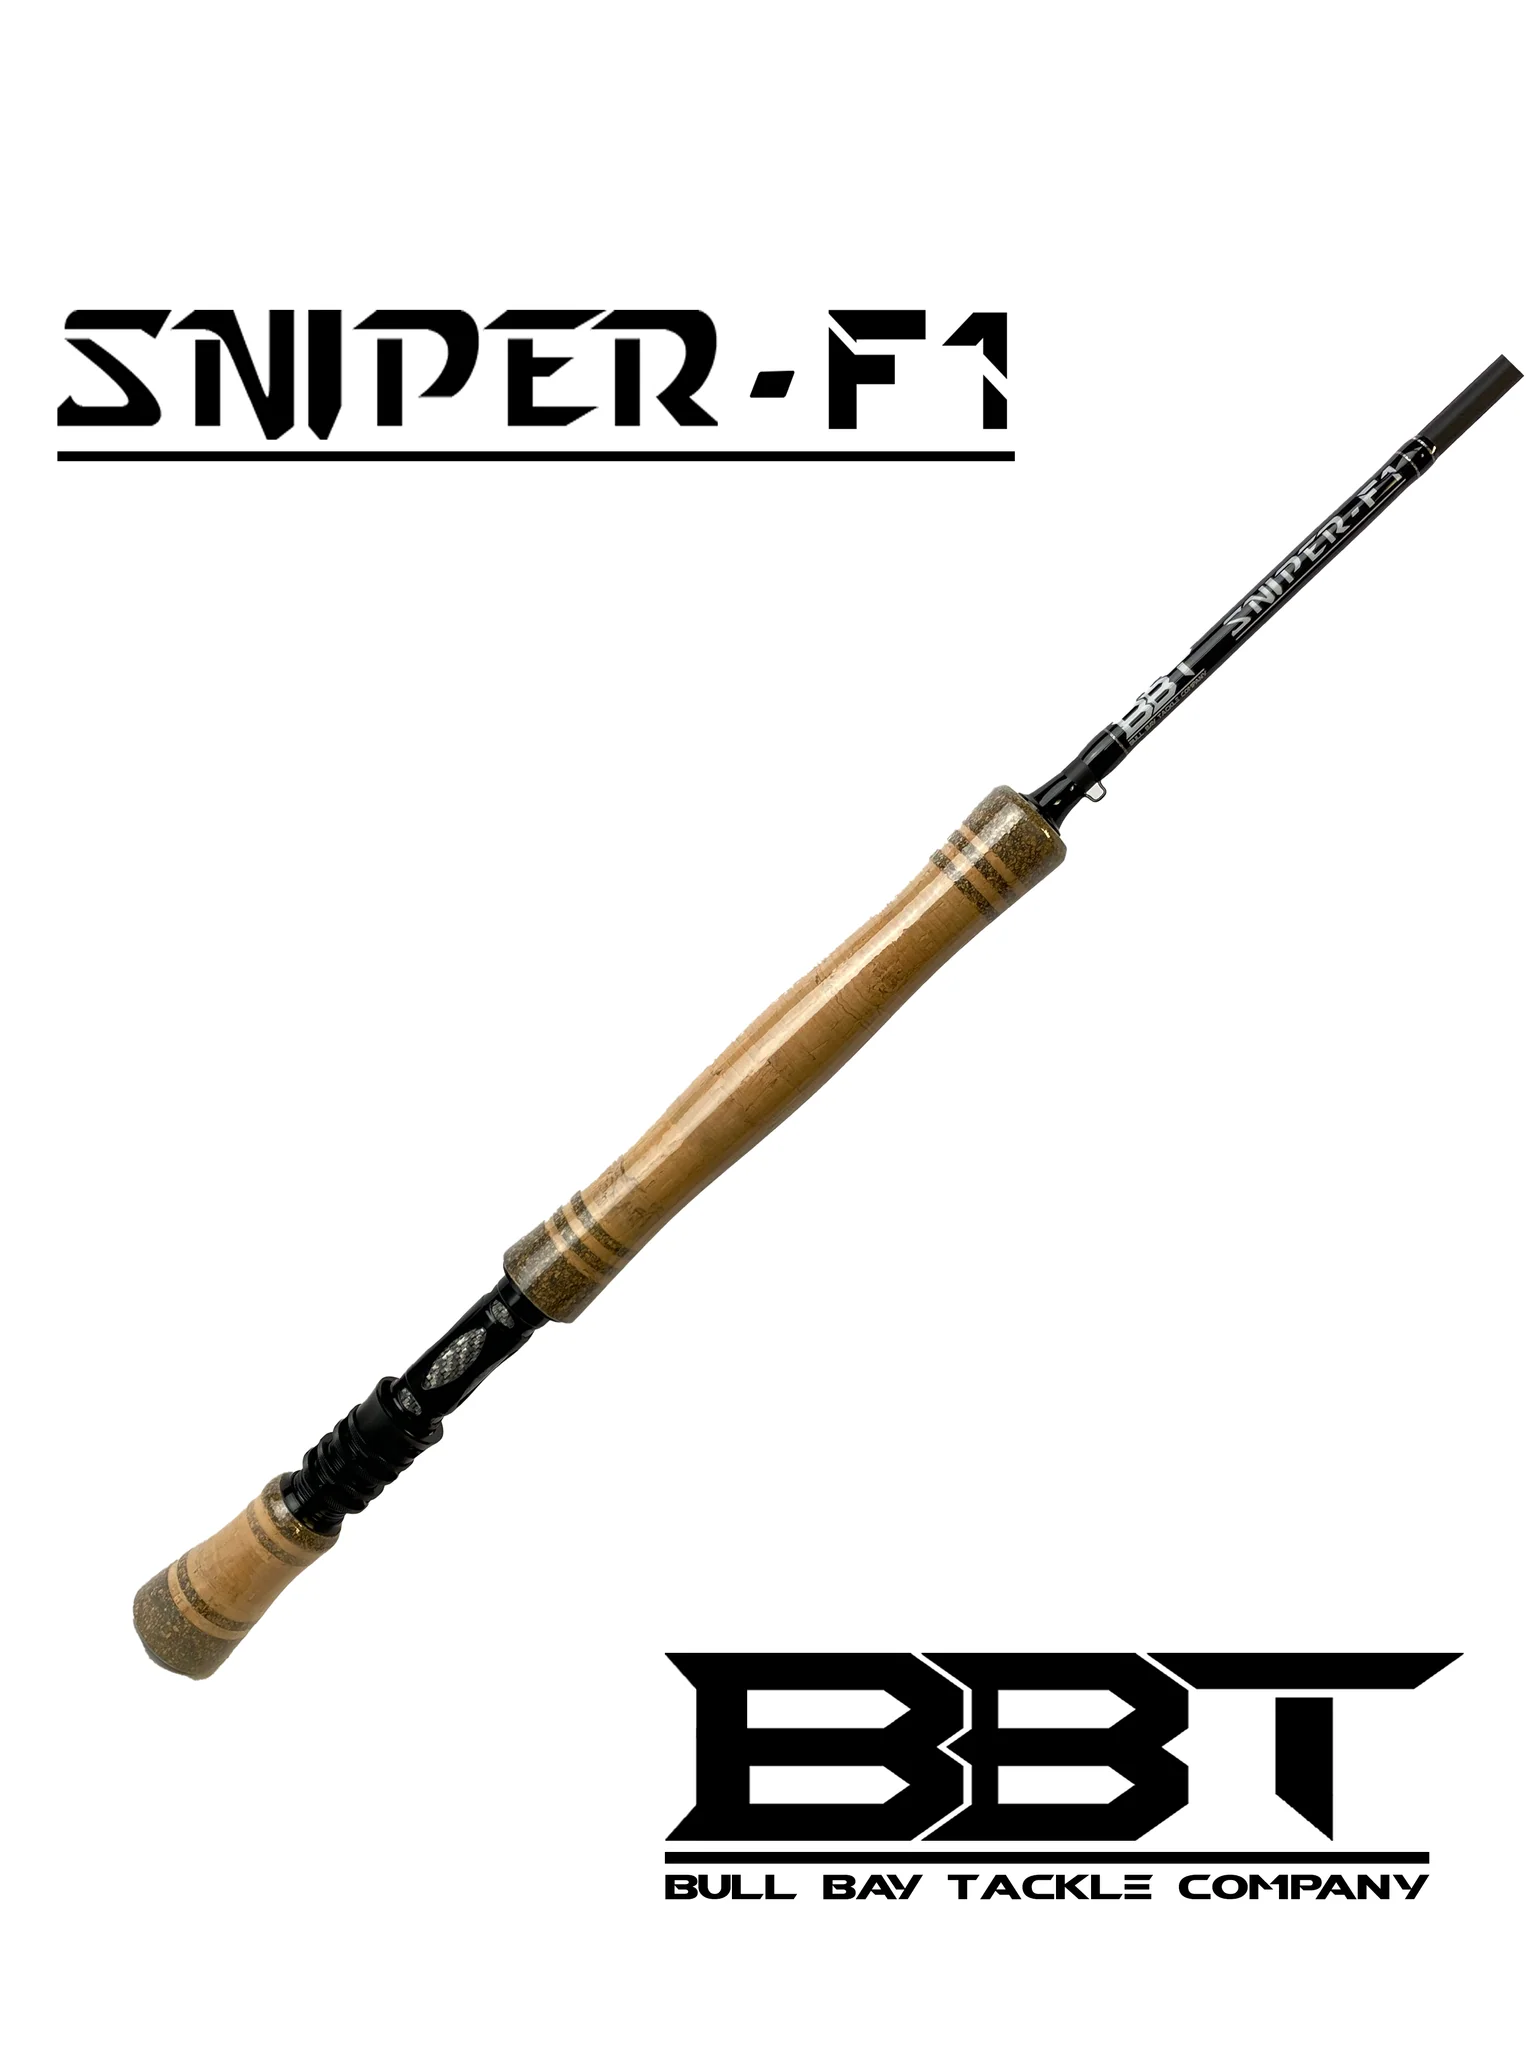 Bull Bay Tackle Sniper F-1 Fly Rod 8wt - Andy Thornal Company